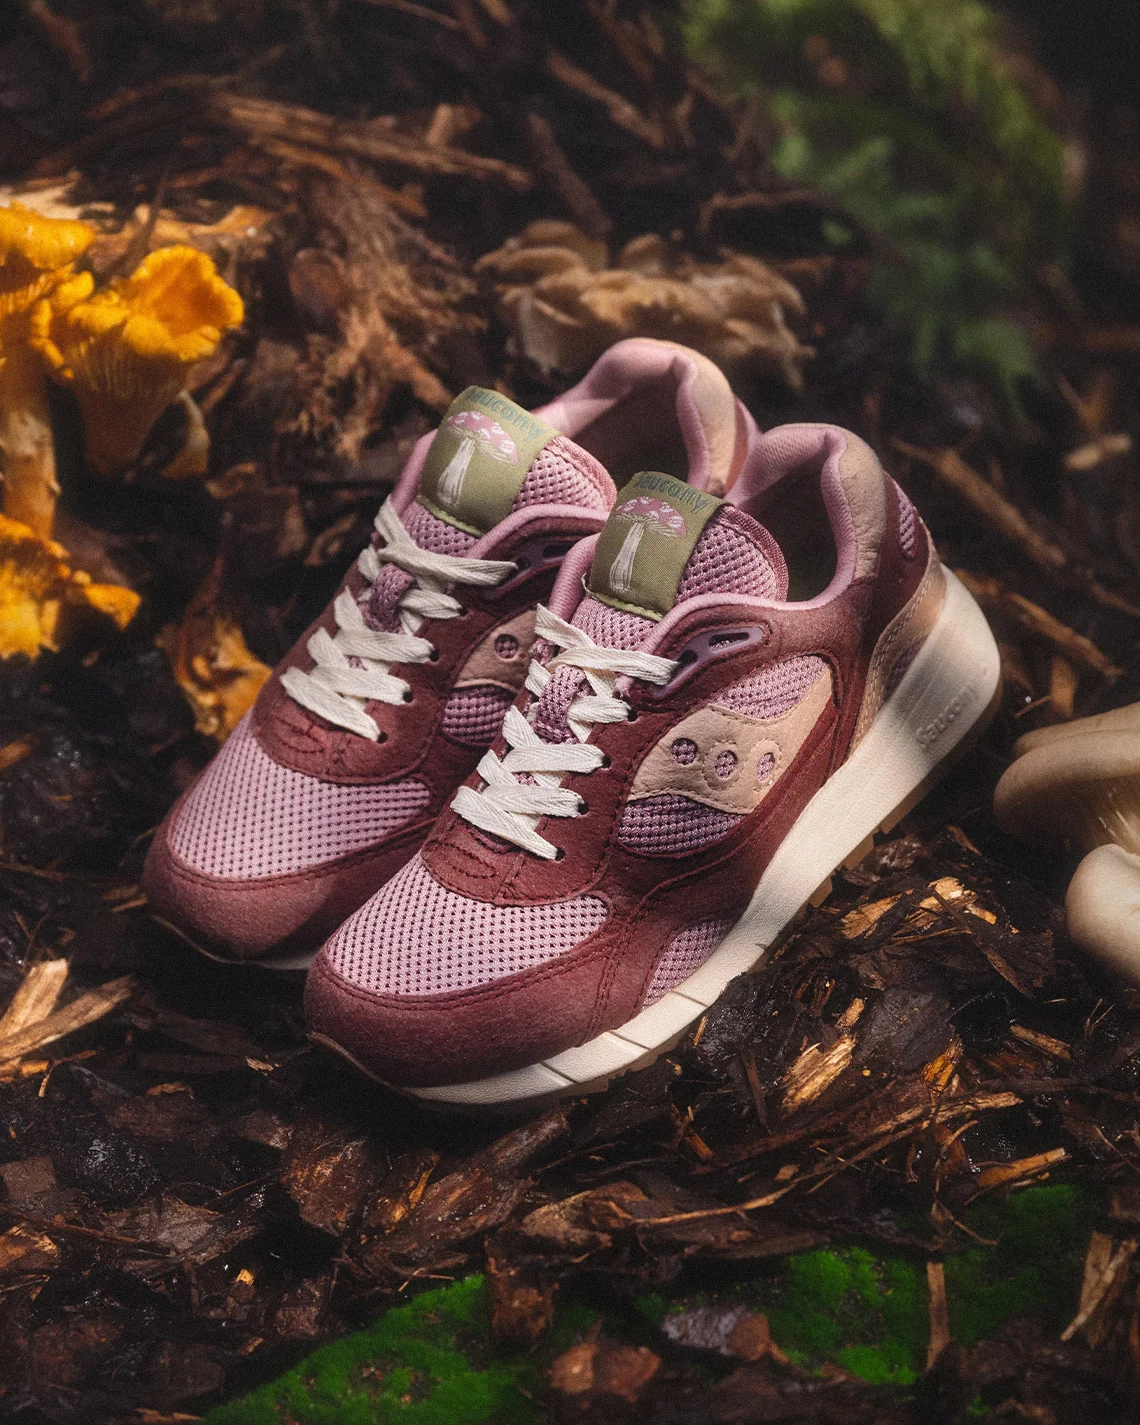 Saucony Celebrates Earth Day with Mushroom-Based Formula Footwear Lineup